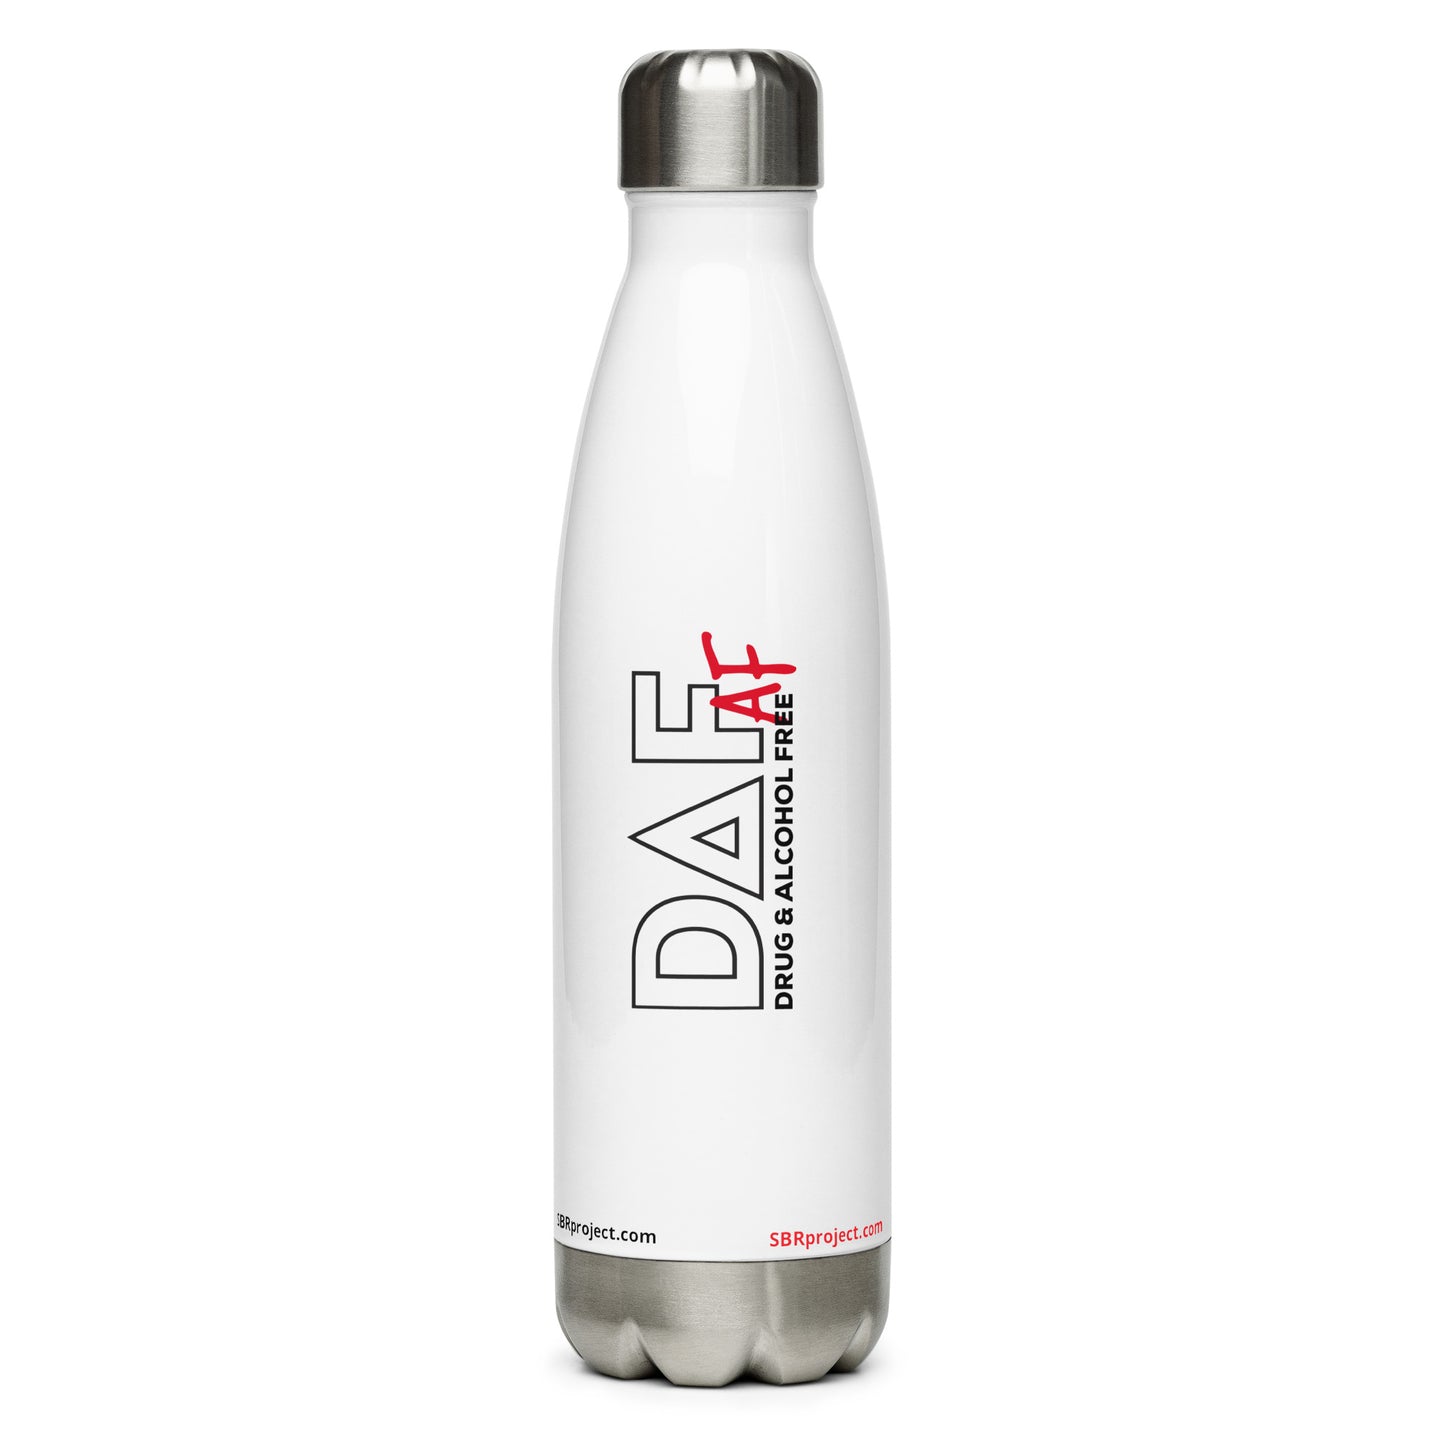 Drug & Alcohol Free as F*%k (DAF) - Stainless Steel Water Bottle